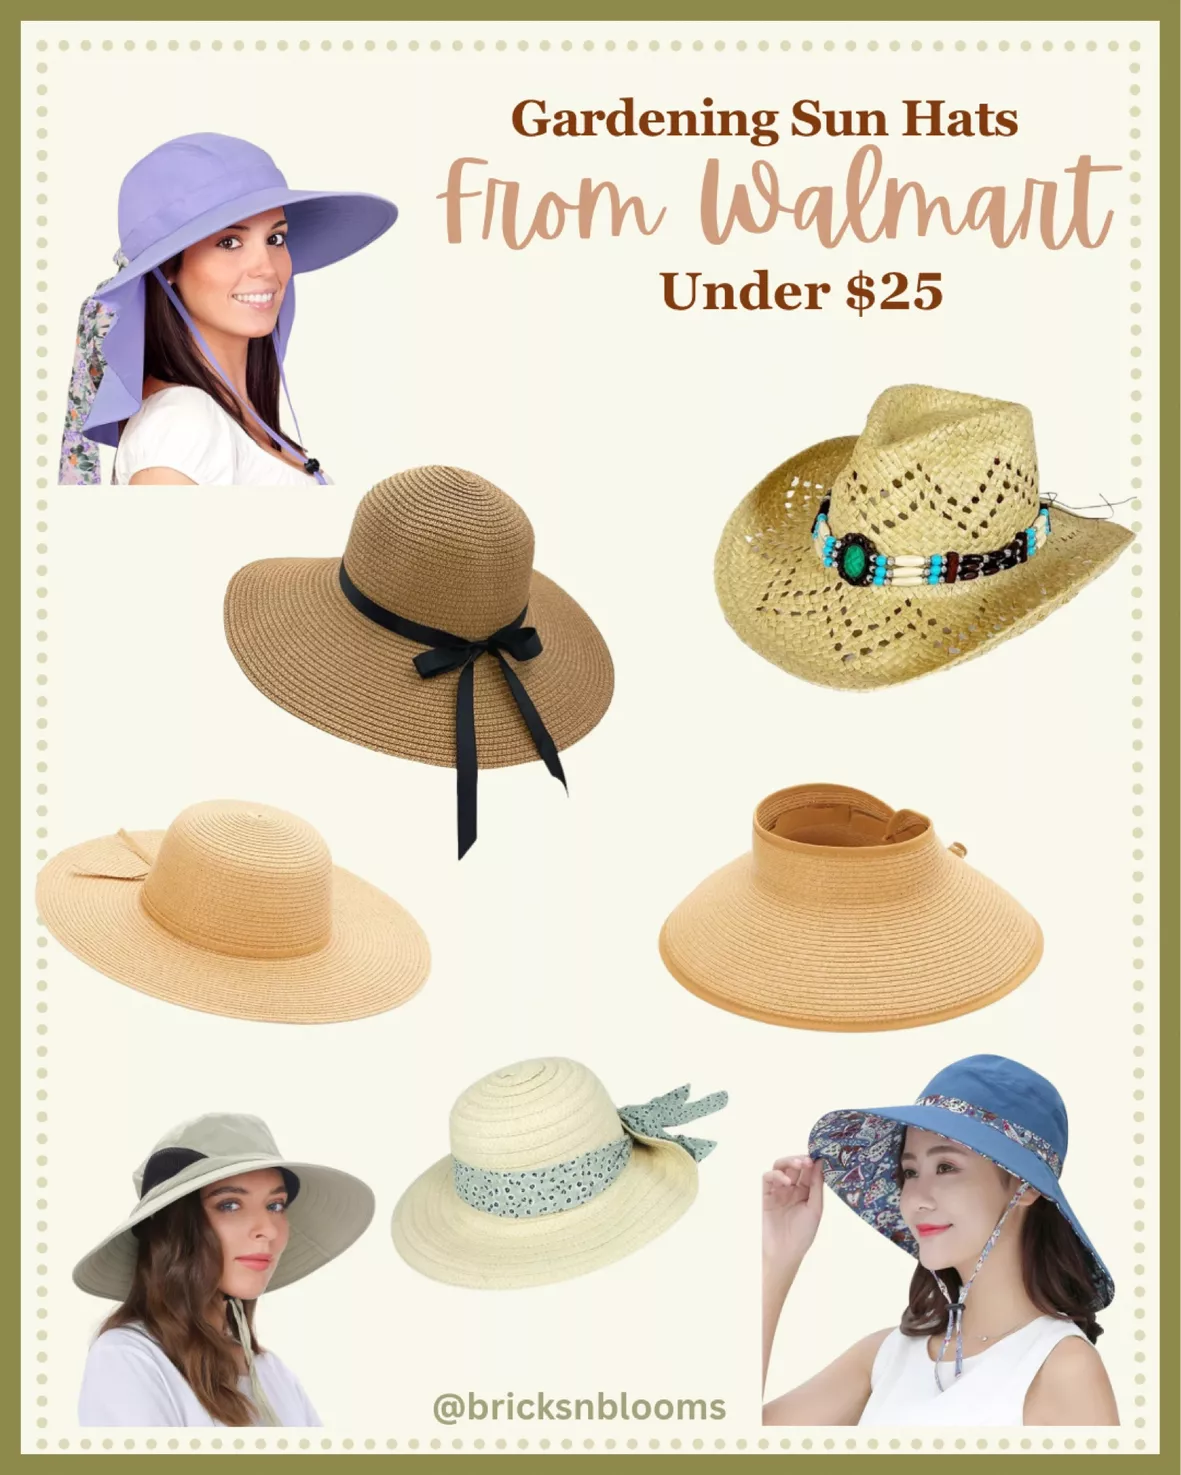 How To: Take Care of Summer Straw Hats 